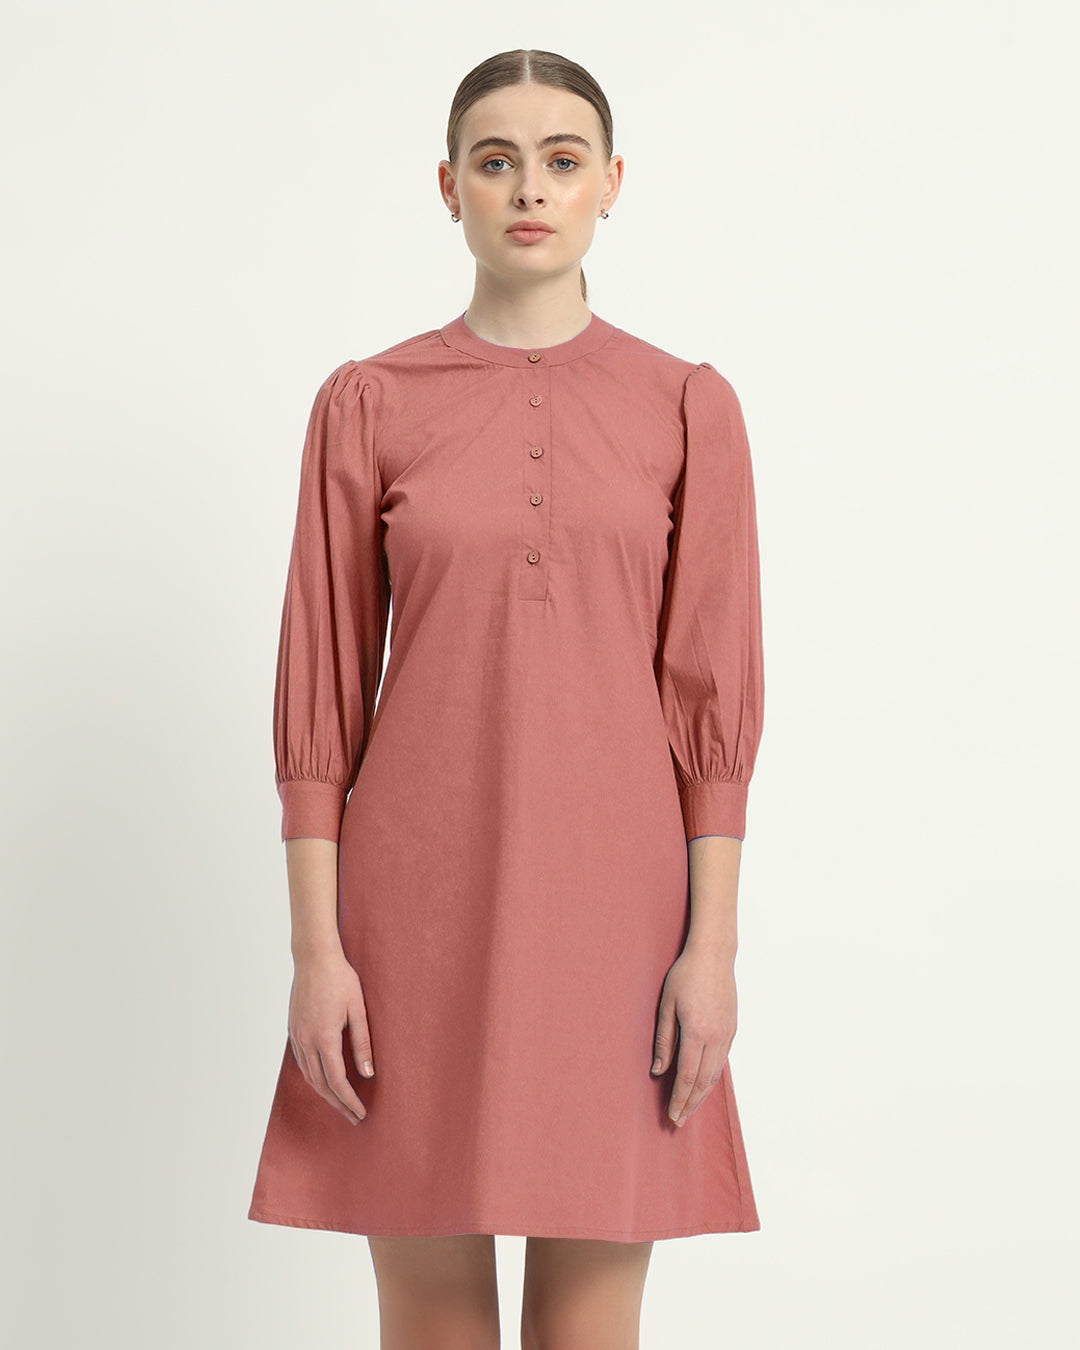 The Ivory Pink Roslyn Cotton Dress